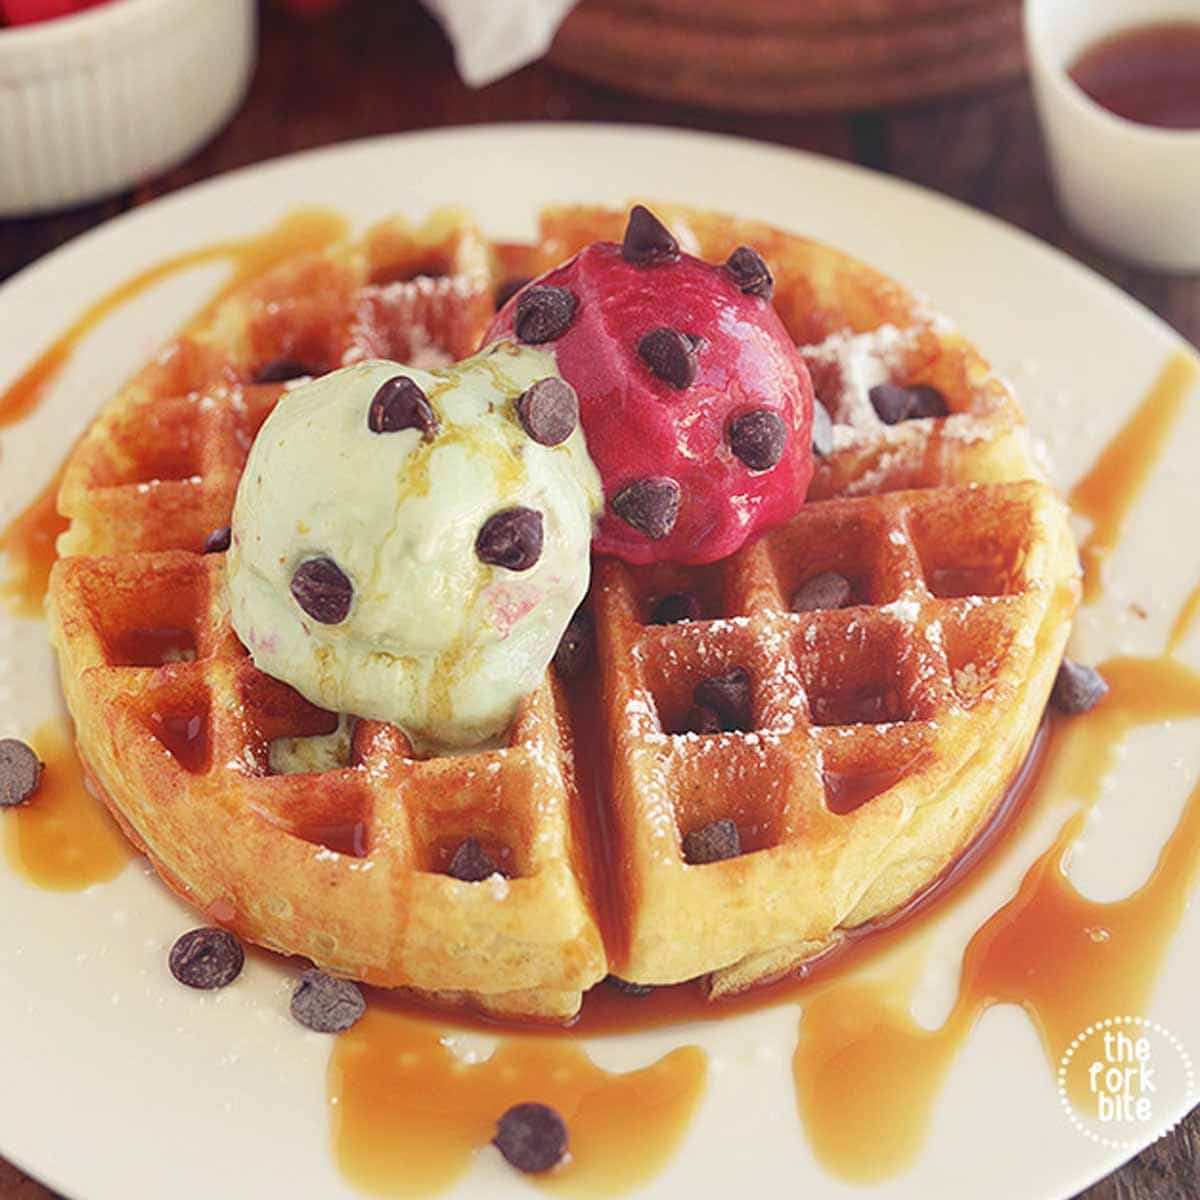 Who can resist these Malted Belgian waffles which are crispy outside and pillowy inside? Garnish them with your favorite fruits, syrup or even ice cream, these waffles have earn a special place in my heart.